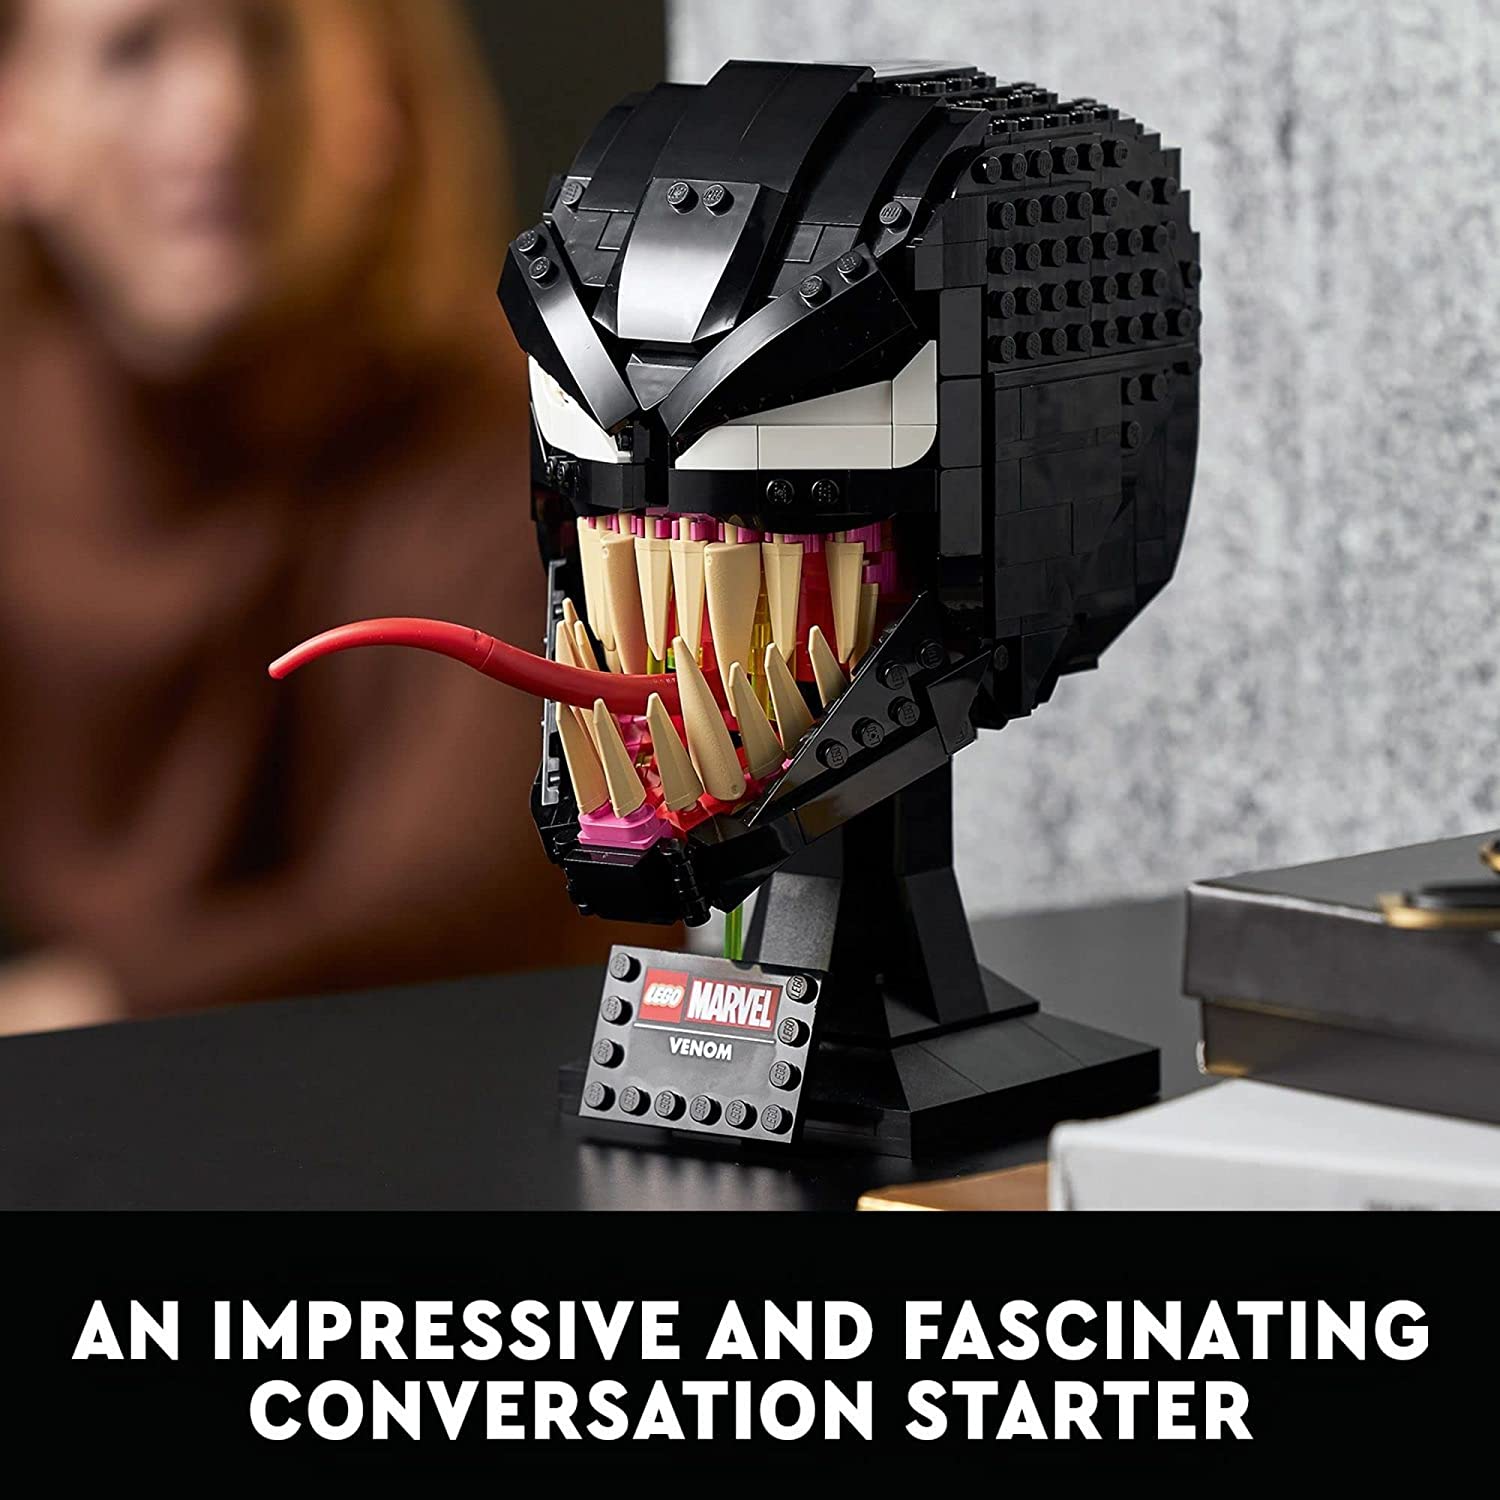 A completed version of Venom built from Lego which also includes a plaque which says, Lego Marvel Venom. There is text which reads, "An impressive fascinating conversation starter."